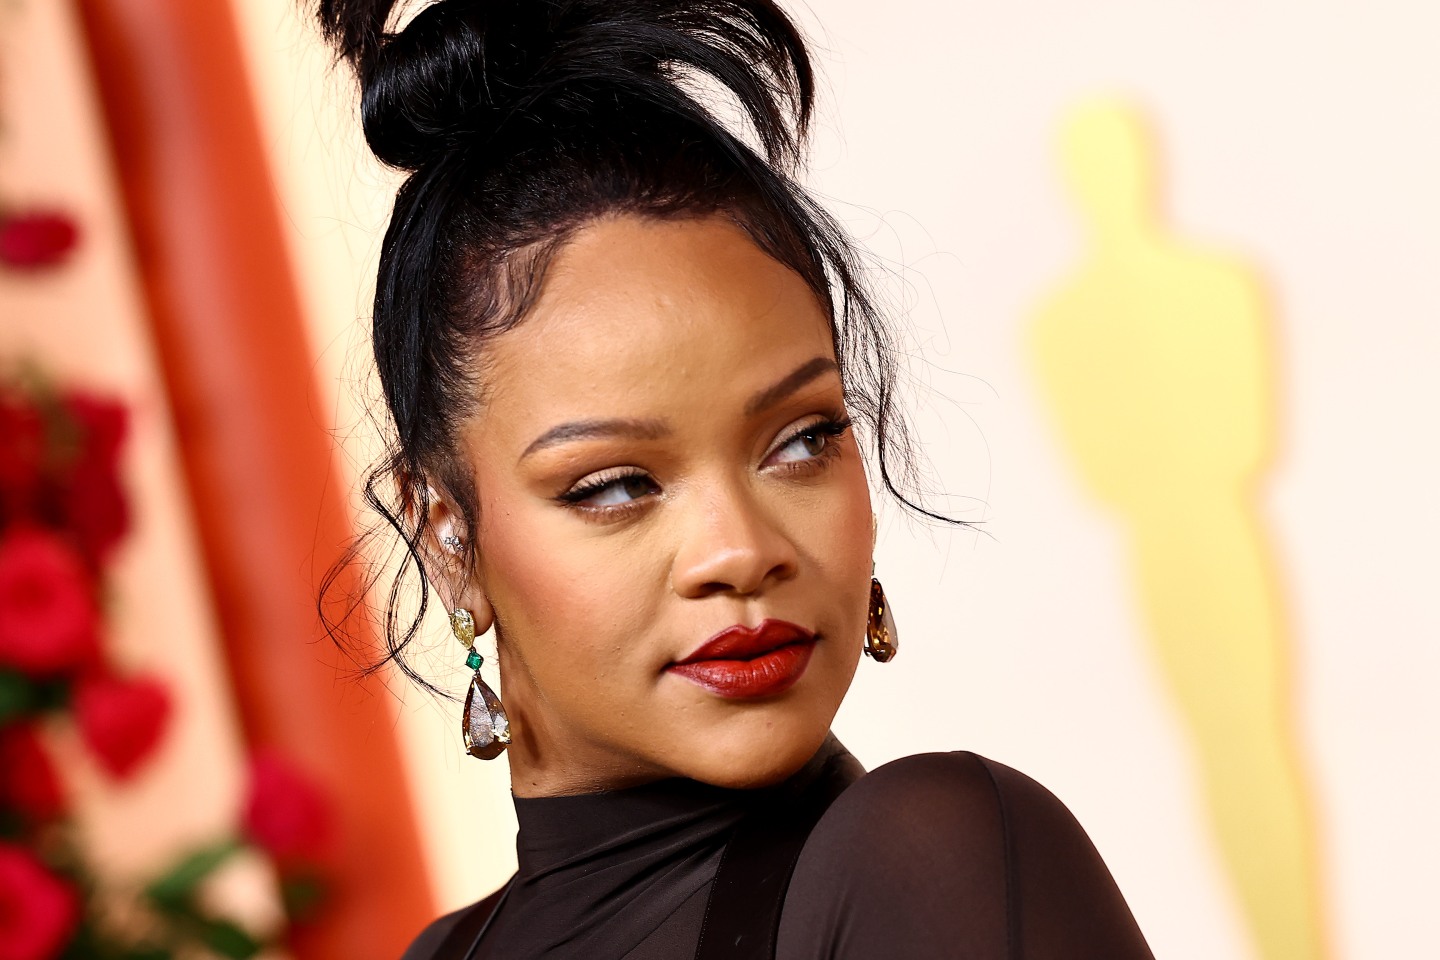 Live News: Rihanna says she is going back into the studio, and more